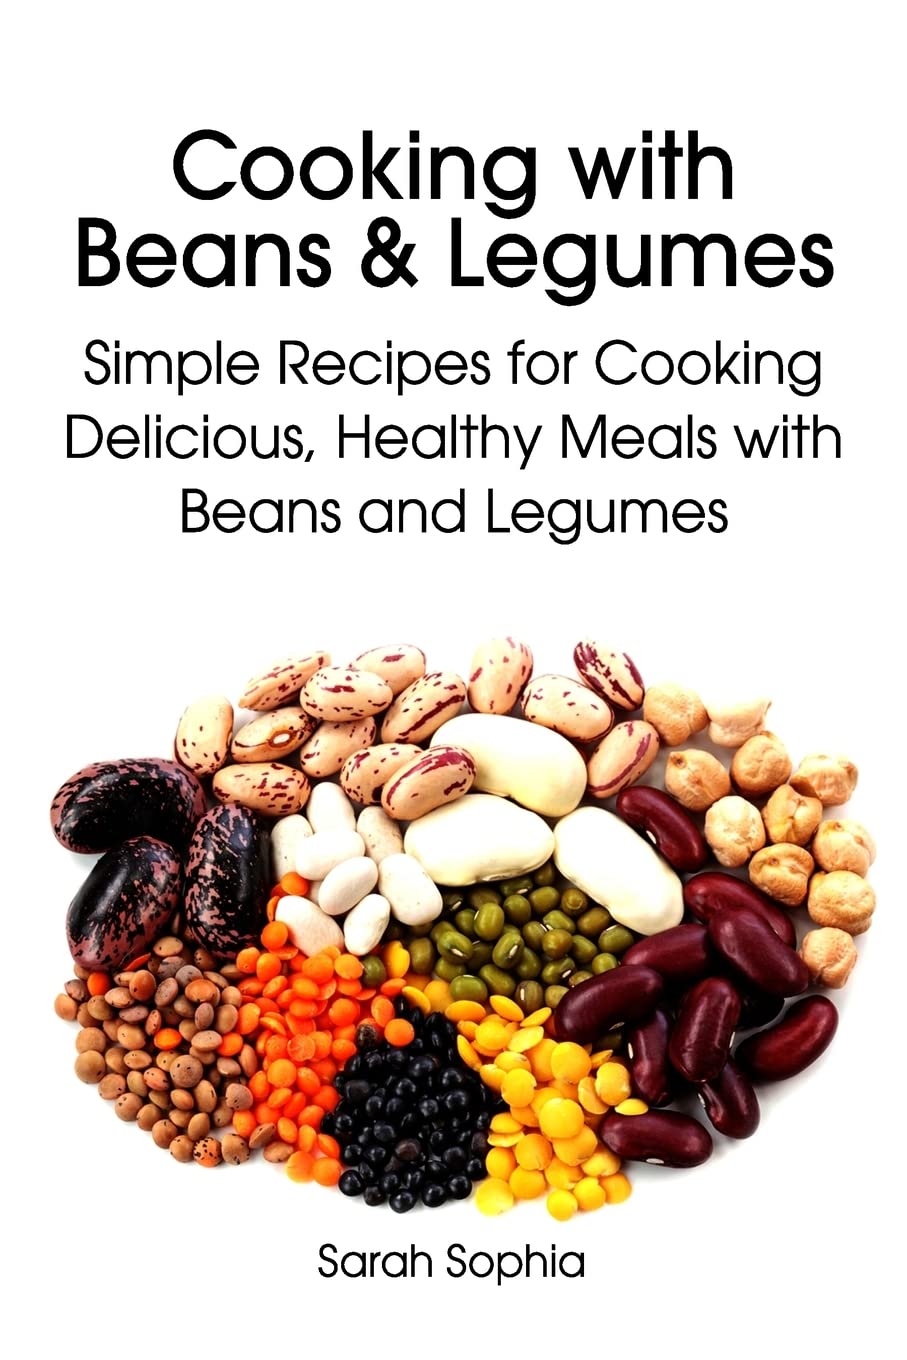 Cooking with Beans and Legumes: Simple Recipes for Cooking Delicious, Healthy Meals with Beans and Legumes: 12 (The Essential Kitchen Series)     Paperback – 13 April 2014